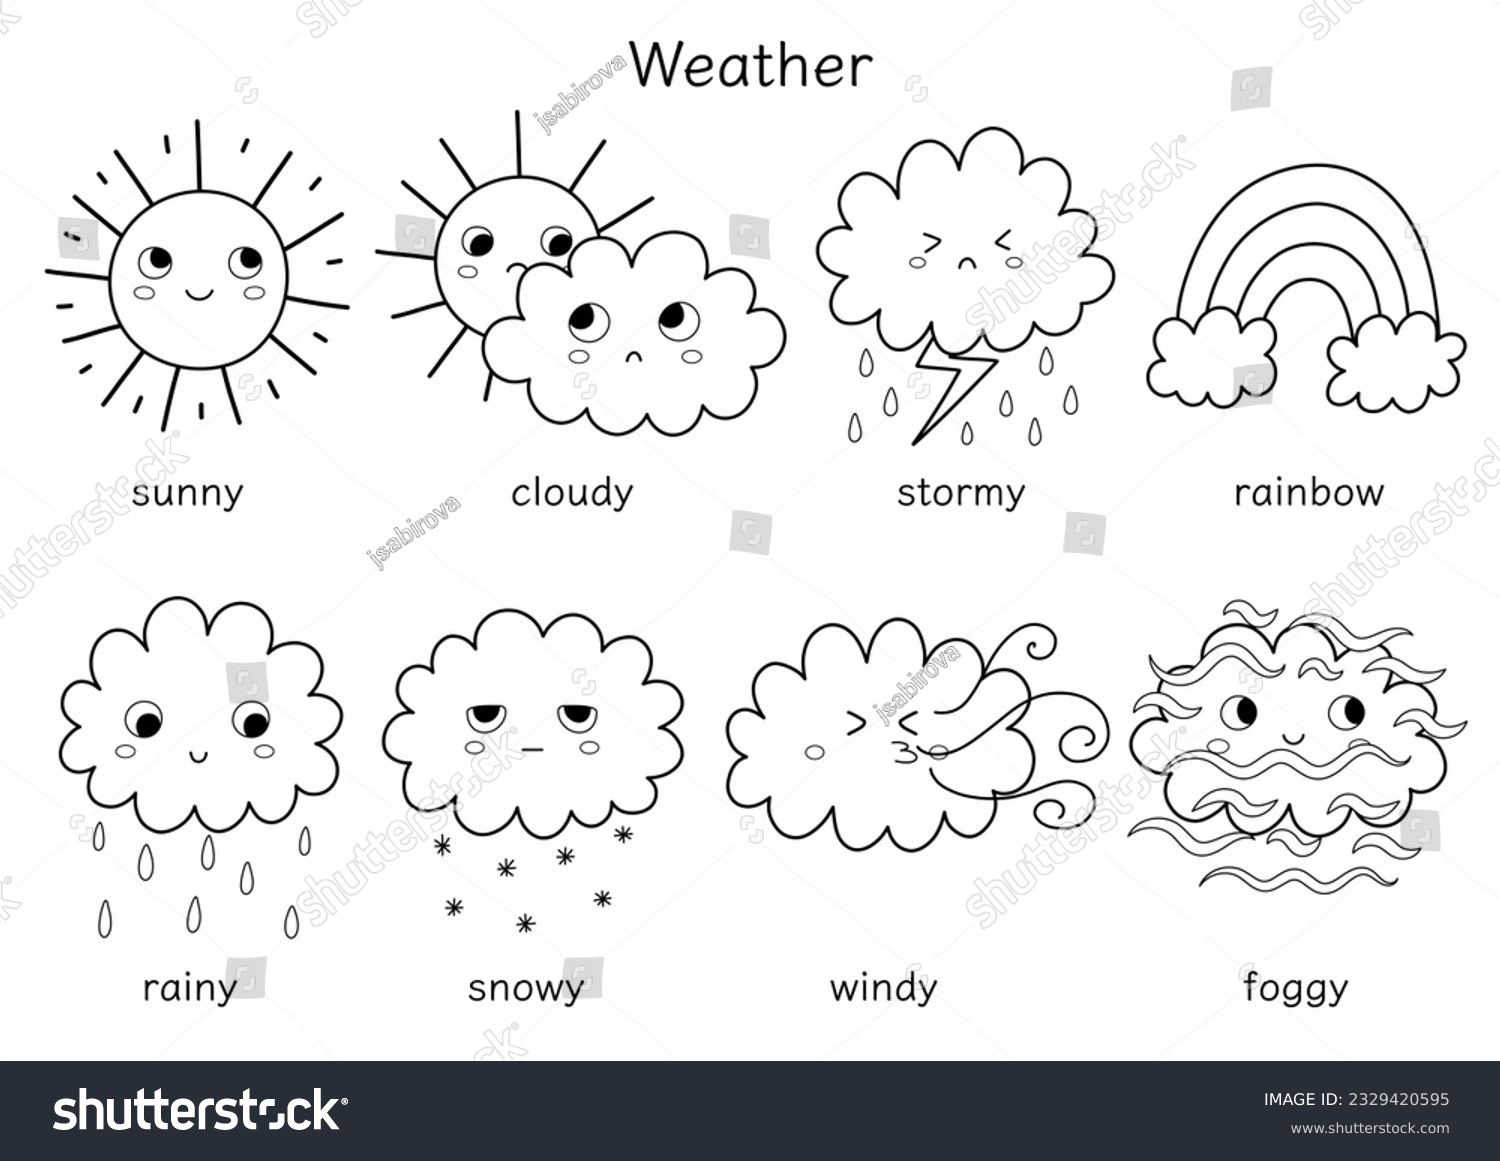 Cute weather characters black and white set for kids. Funny sun, clouds, rainbow clipart collection in outline for coloring book. Vector illustration #2329420595